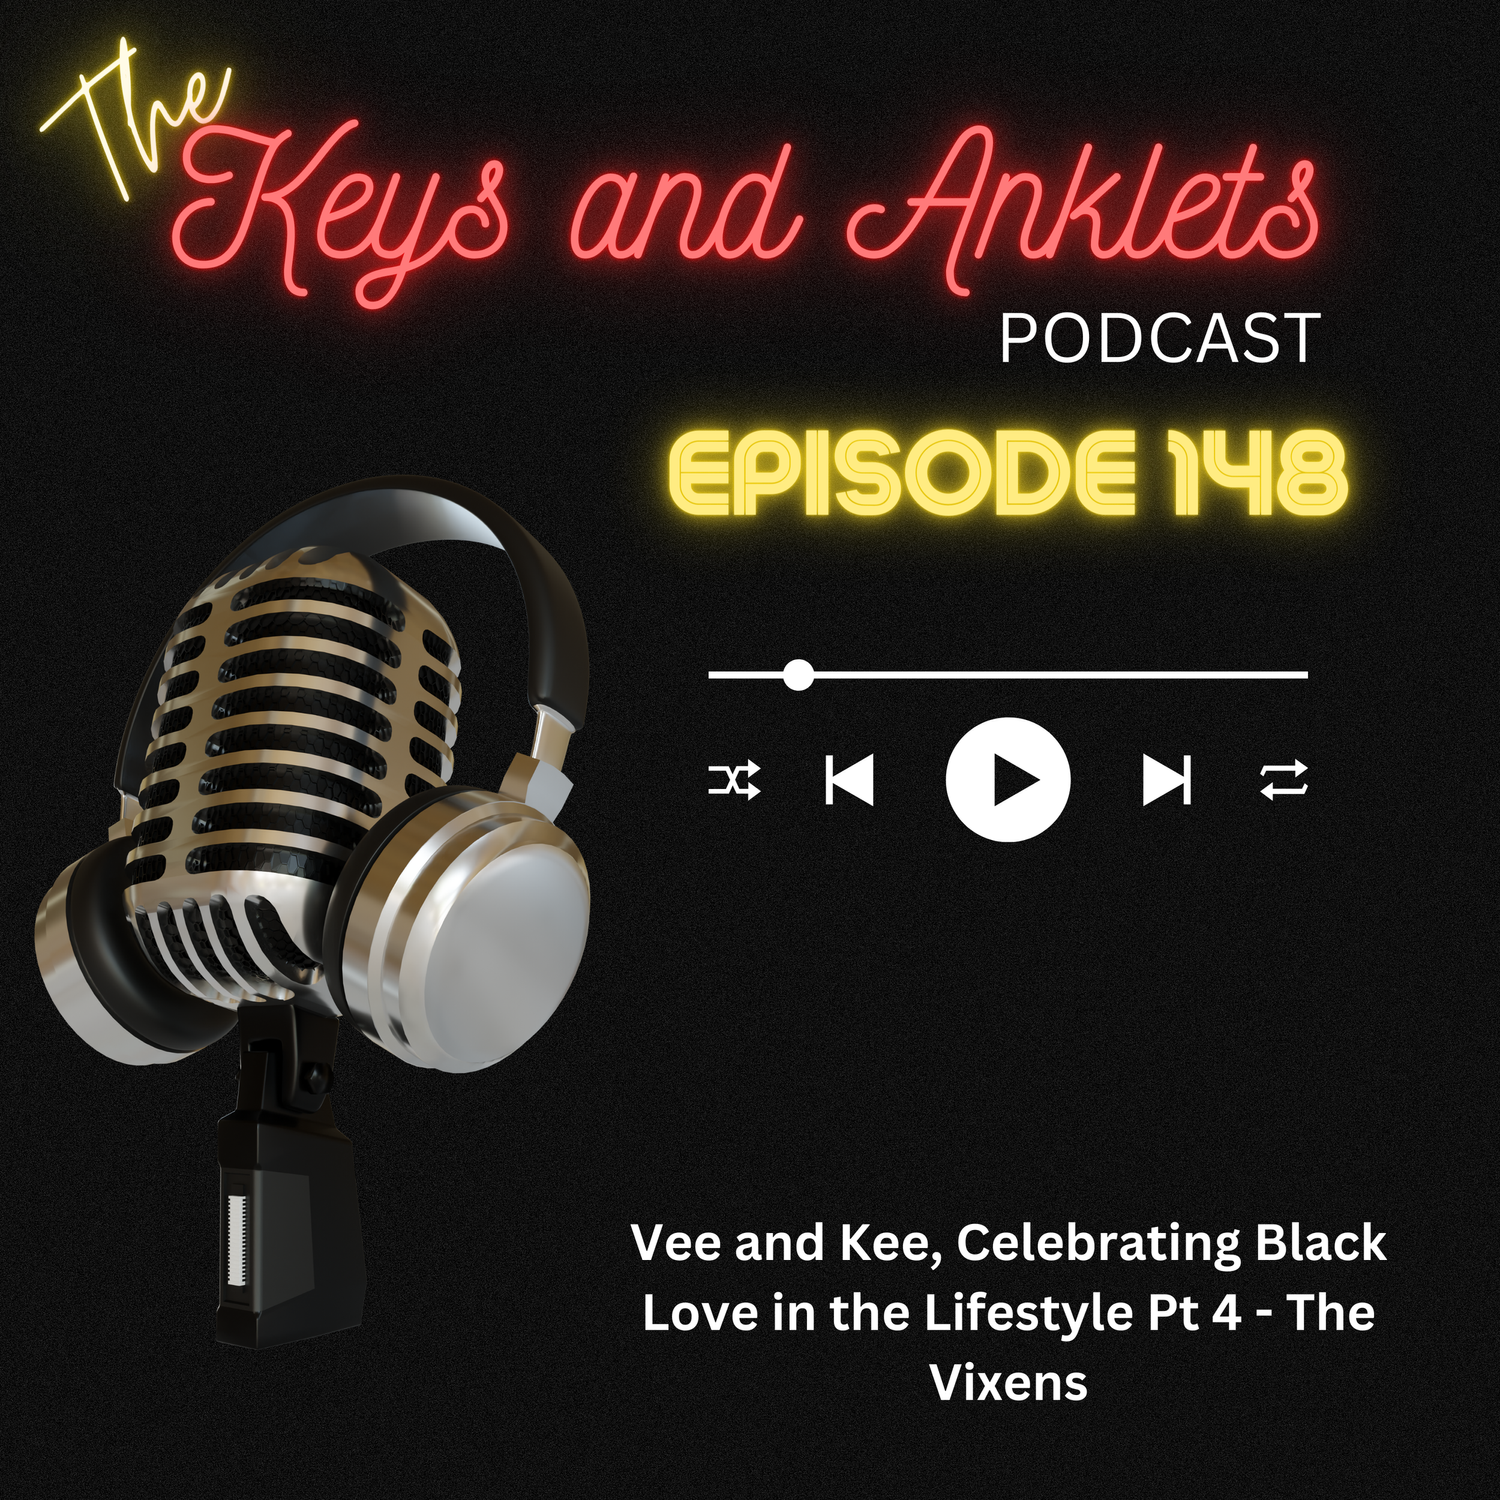 Episode 148 - Vee and Kee, Celebrating Black Love in the Lifestyle Pt 4 - The Vixens